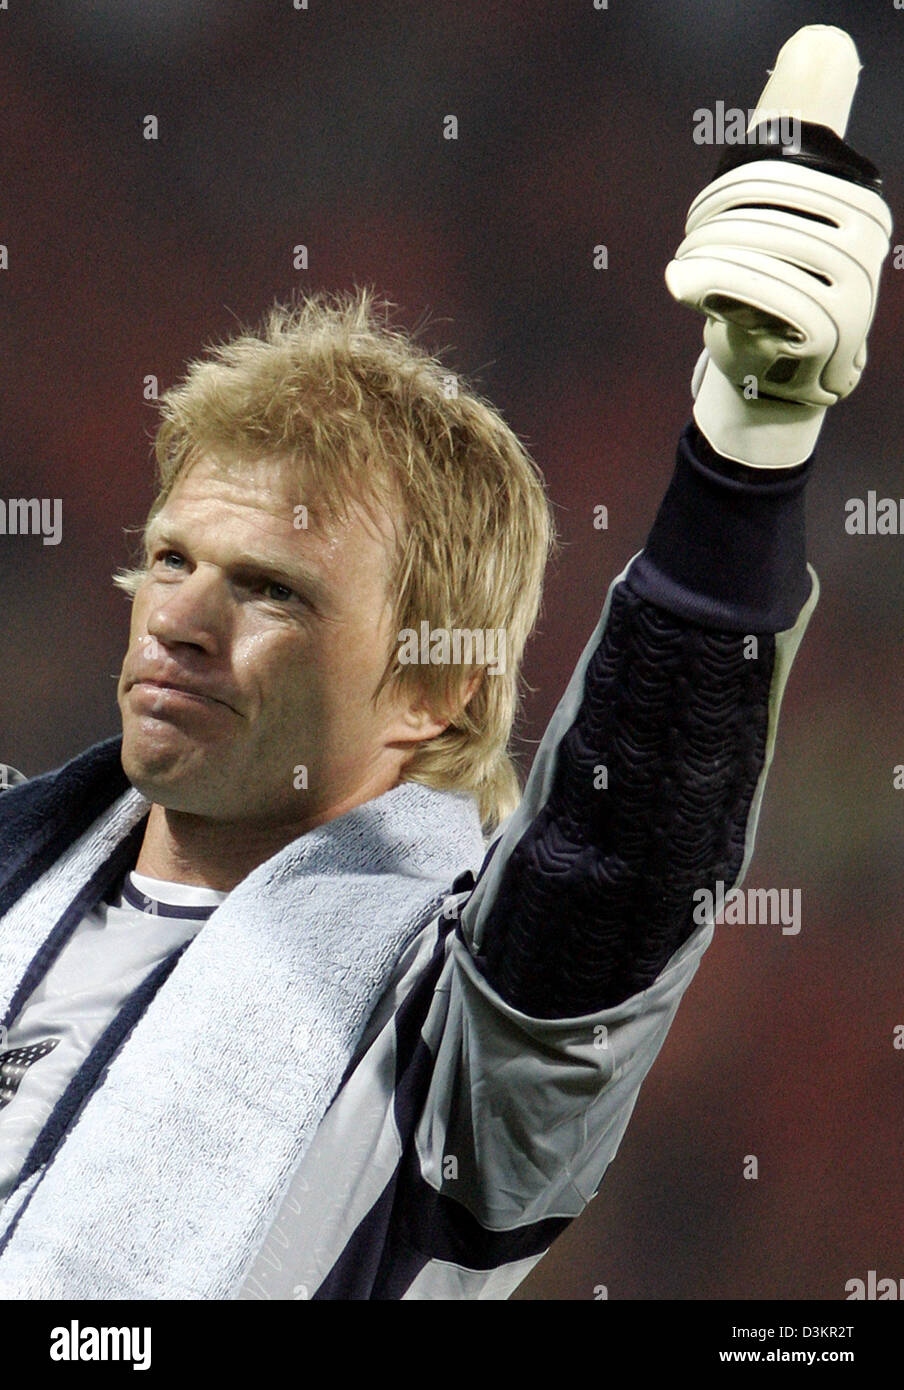 (dpa) - Goalkeeper of the German national soccer team Oliver Kahn  thanks the fans for their support during the friendly match Netherlands vs Germany at the 'De Kuip' stadium in Rotterdam, Netherlands, 17 August 2005. The game ended in a 2-2 draw. Photo: Frank May Stock Photo